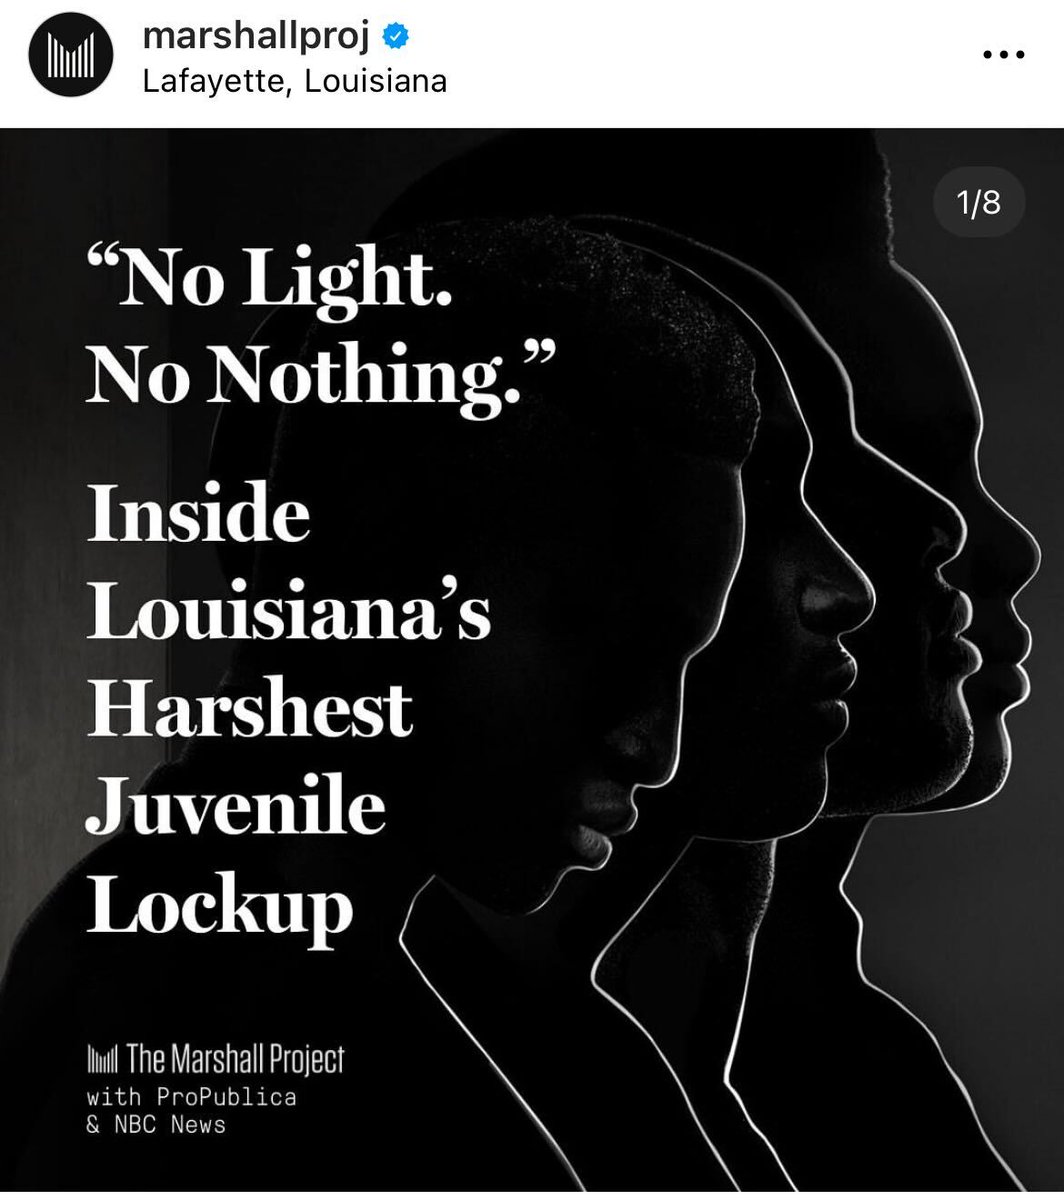 Teens, some with serious mental illness, were locked alone for at least 23 hours a day for weeks on end at this Louisiana facility. Read about it on our Instagram: trib.al/VPdtdNa